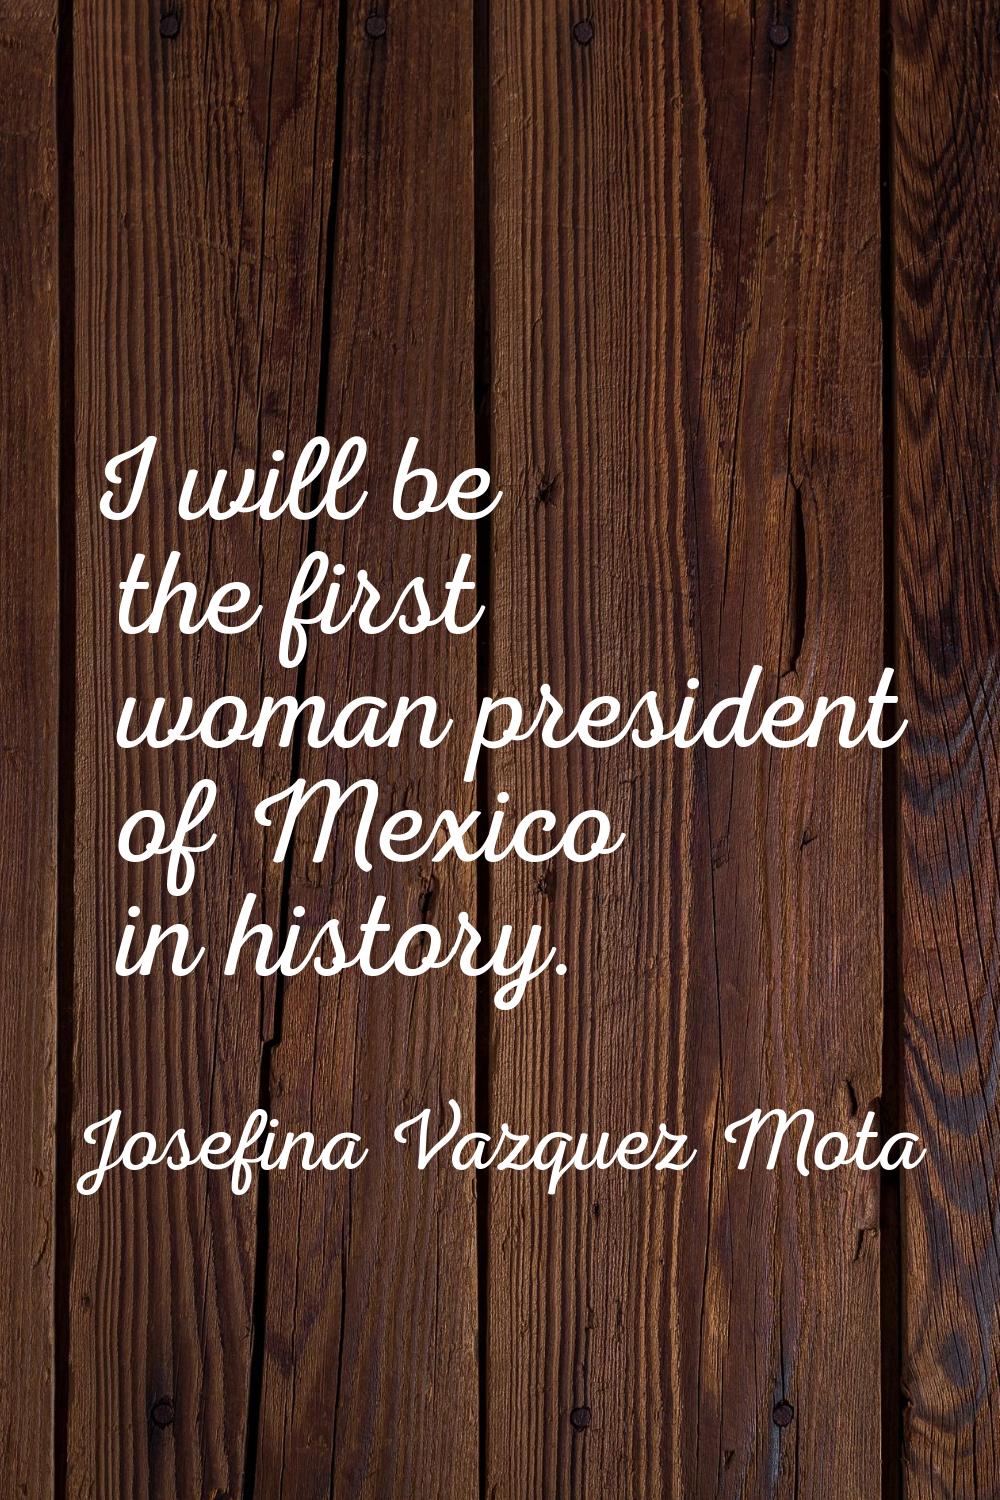 I will be the first woman president of Mexico in history.